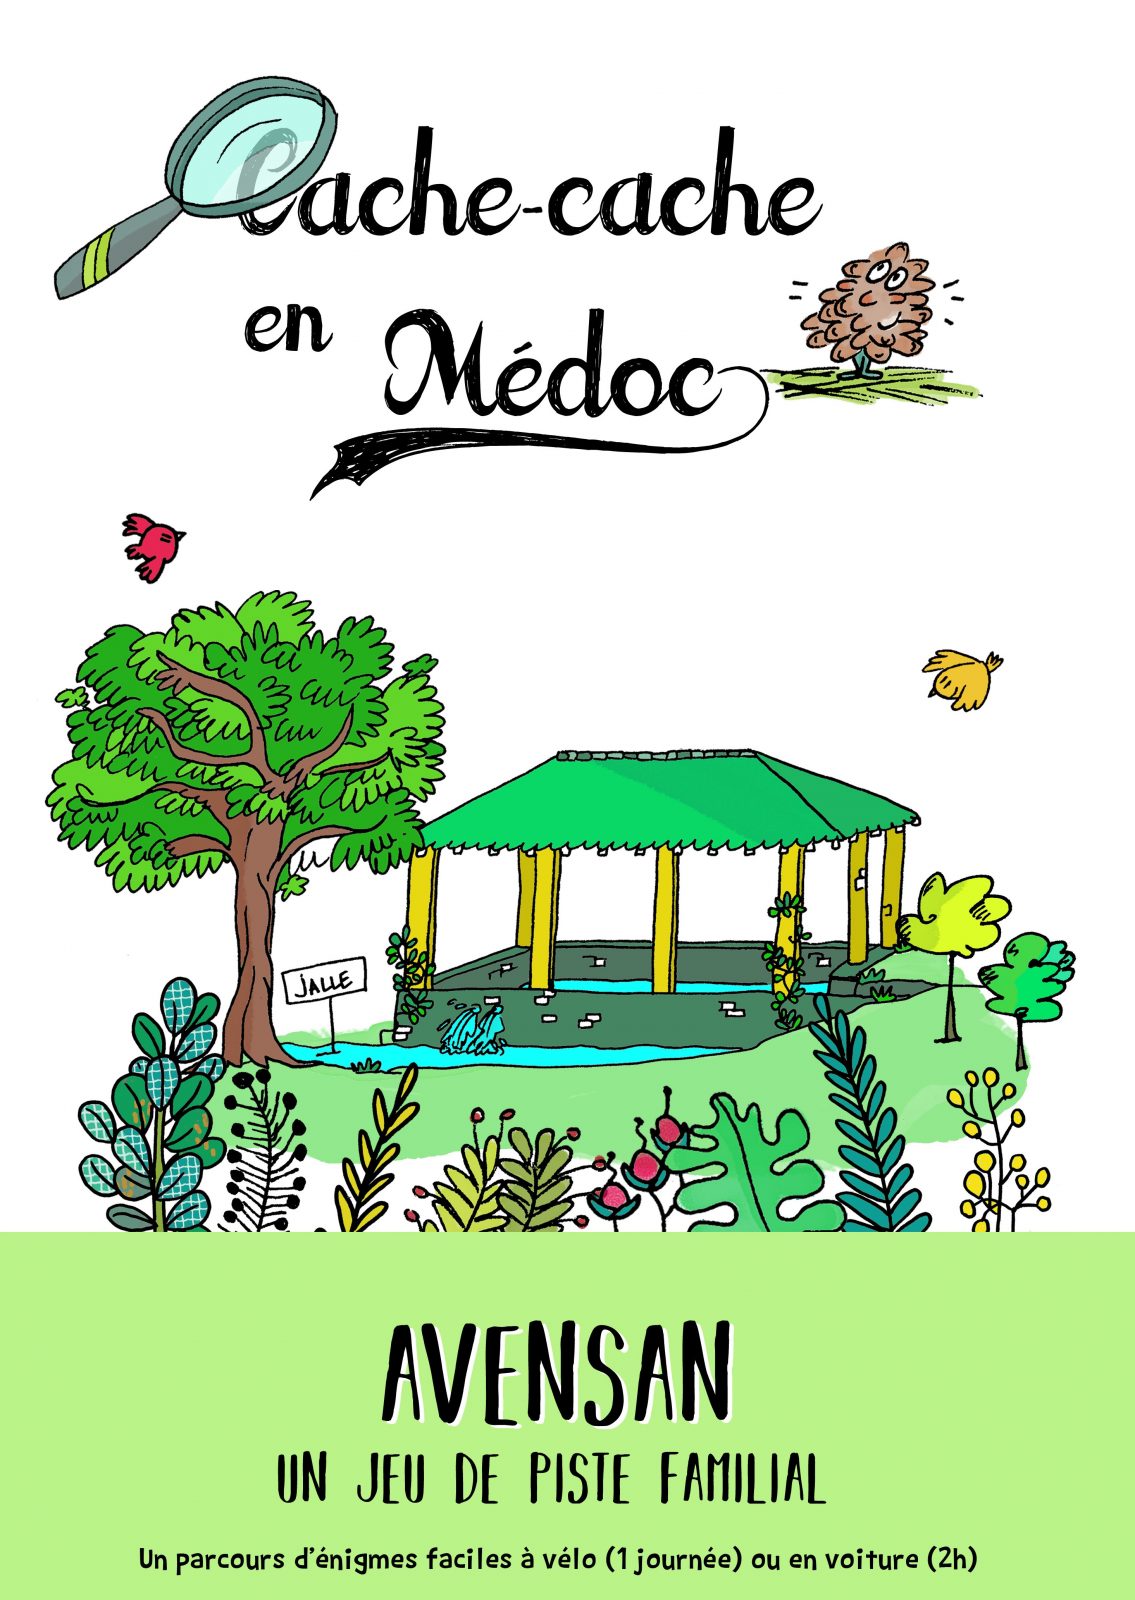 Hide and seek in the Médoc in Avensan